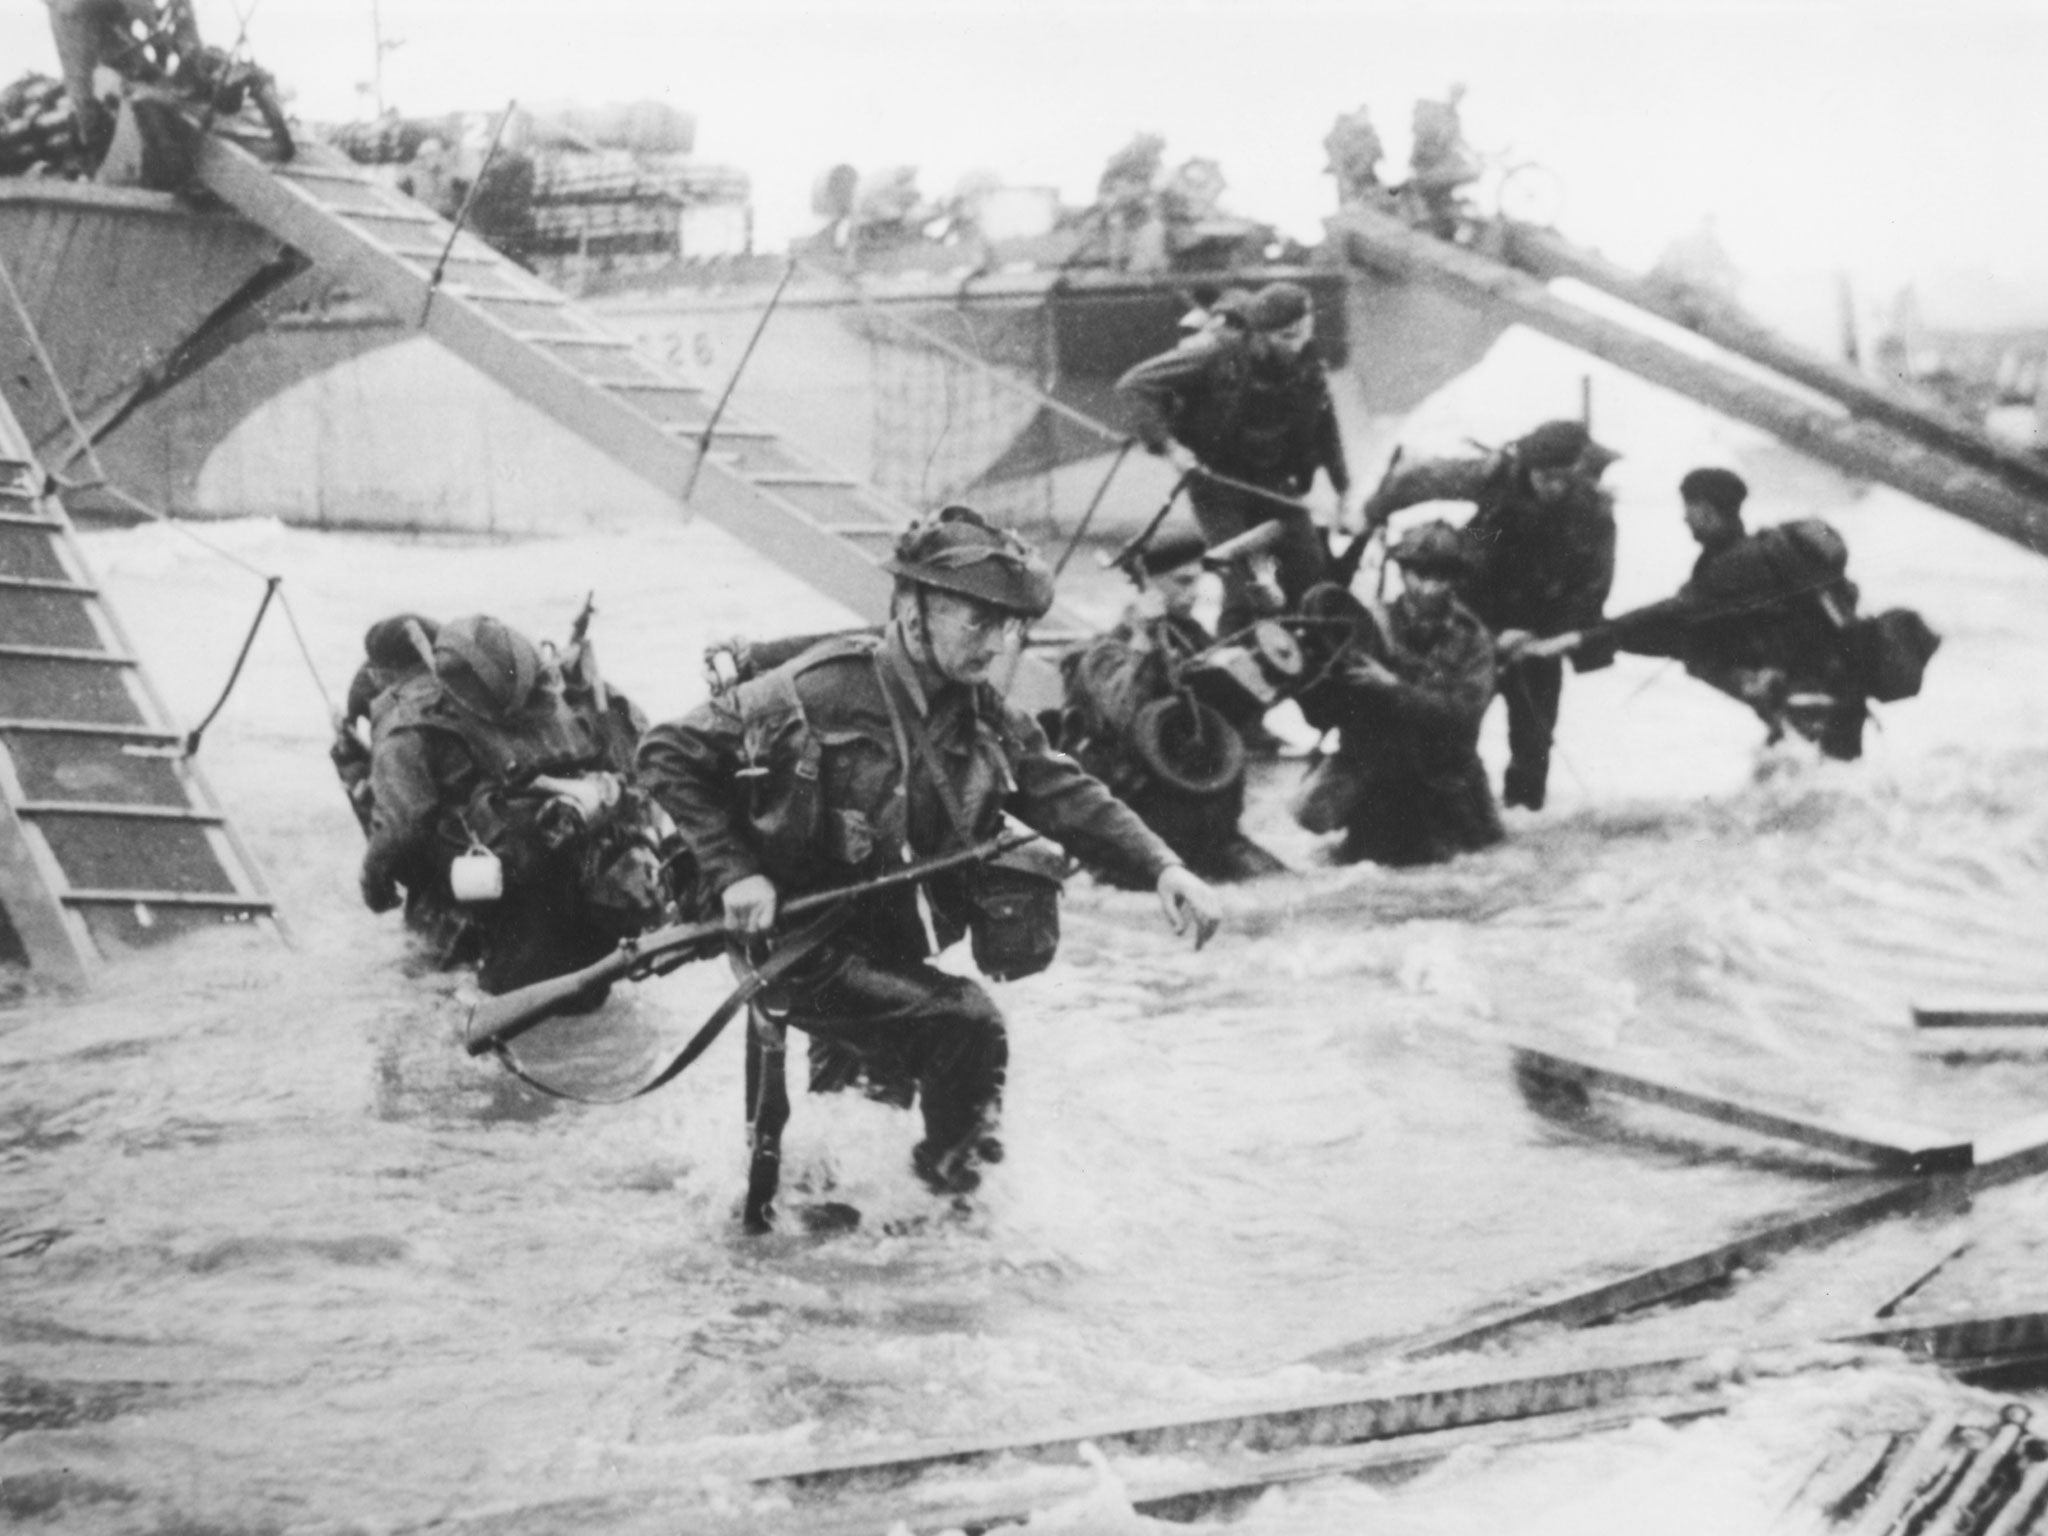 Troops from the 48th Royal Marines at Saint-Aubin-sur-mer on Juno Beach, Normandy, France, during the D-Day landings, 1944